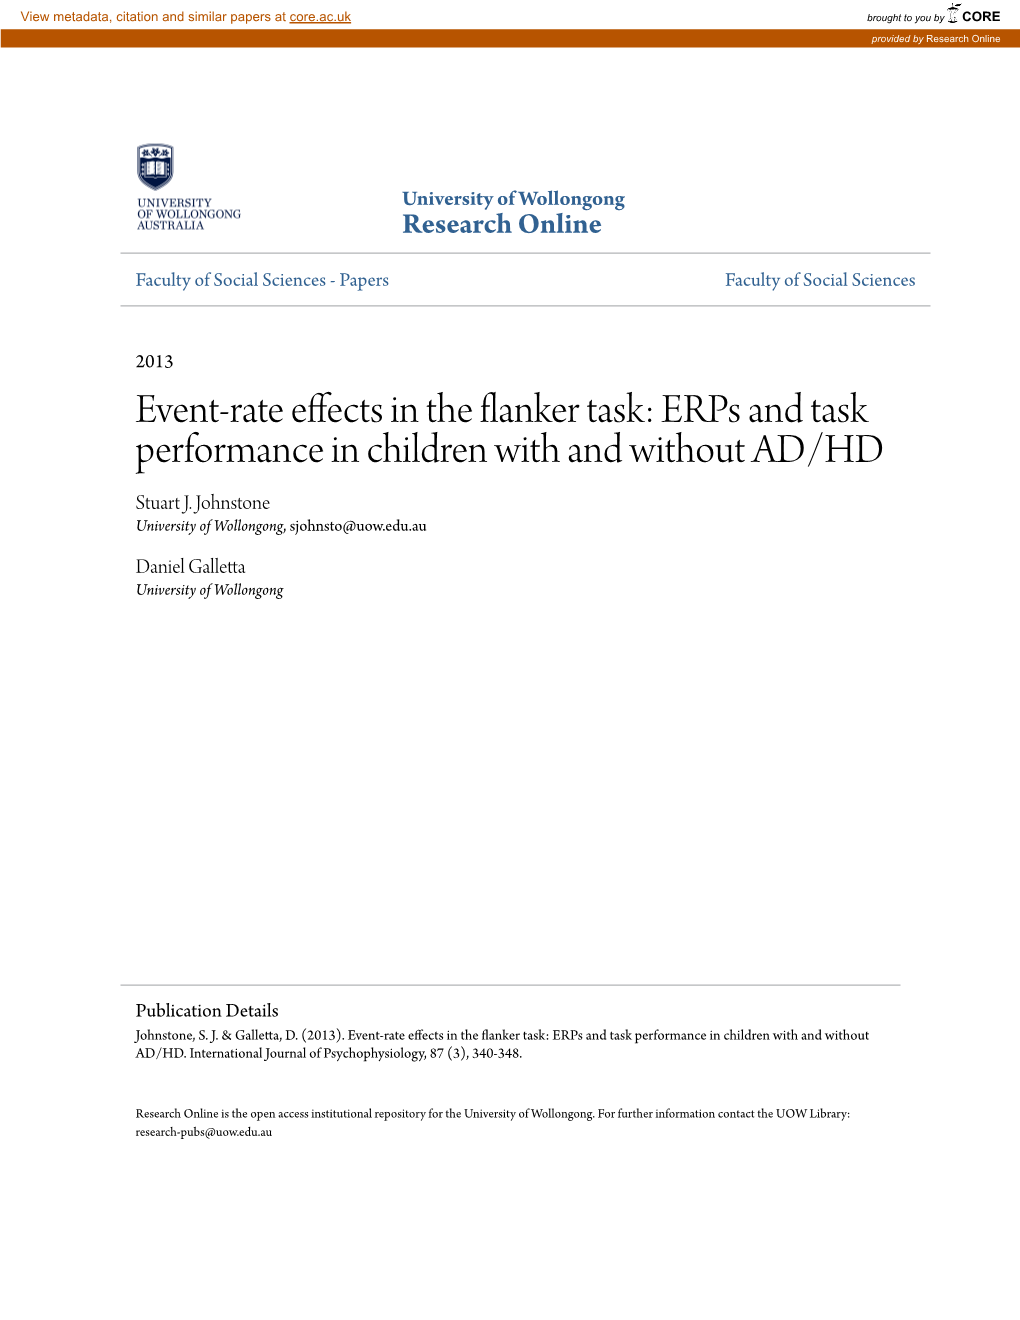 Event-Rate Effects in the Flanker Task: Erps and Task Performance in Children with and Without AD/HD Stuart J